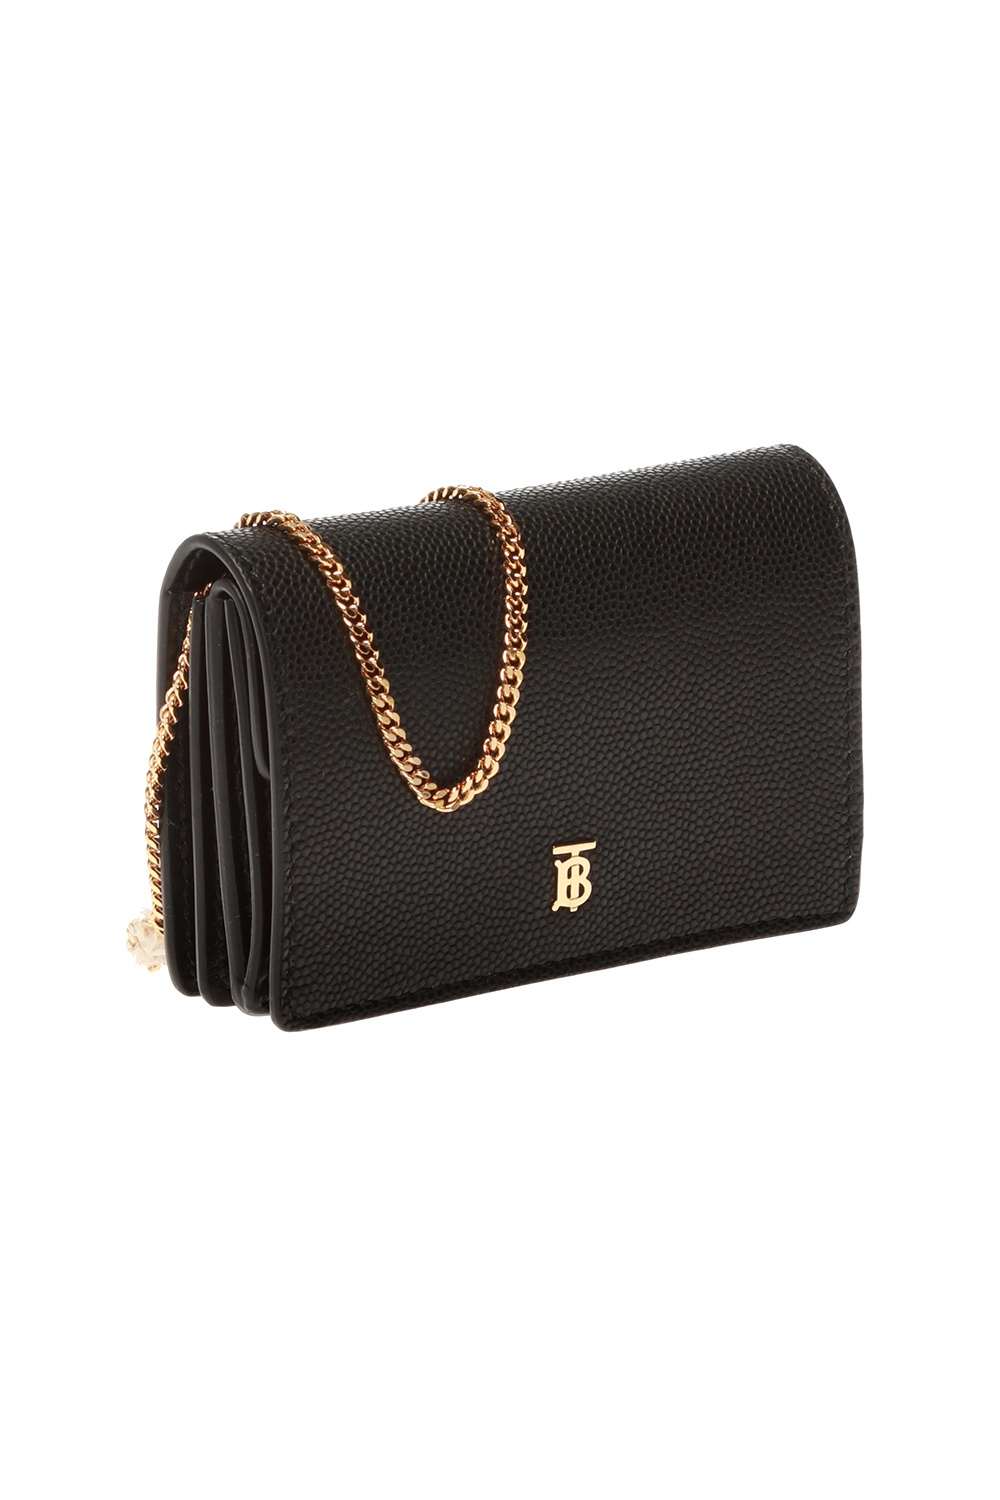 Burberry Card case on a chain, Women's Accessories